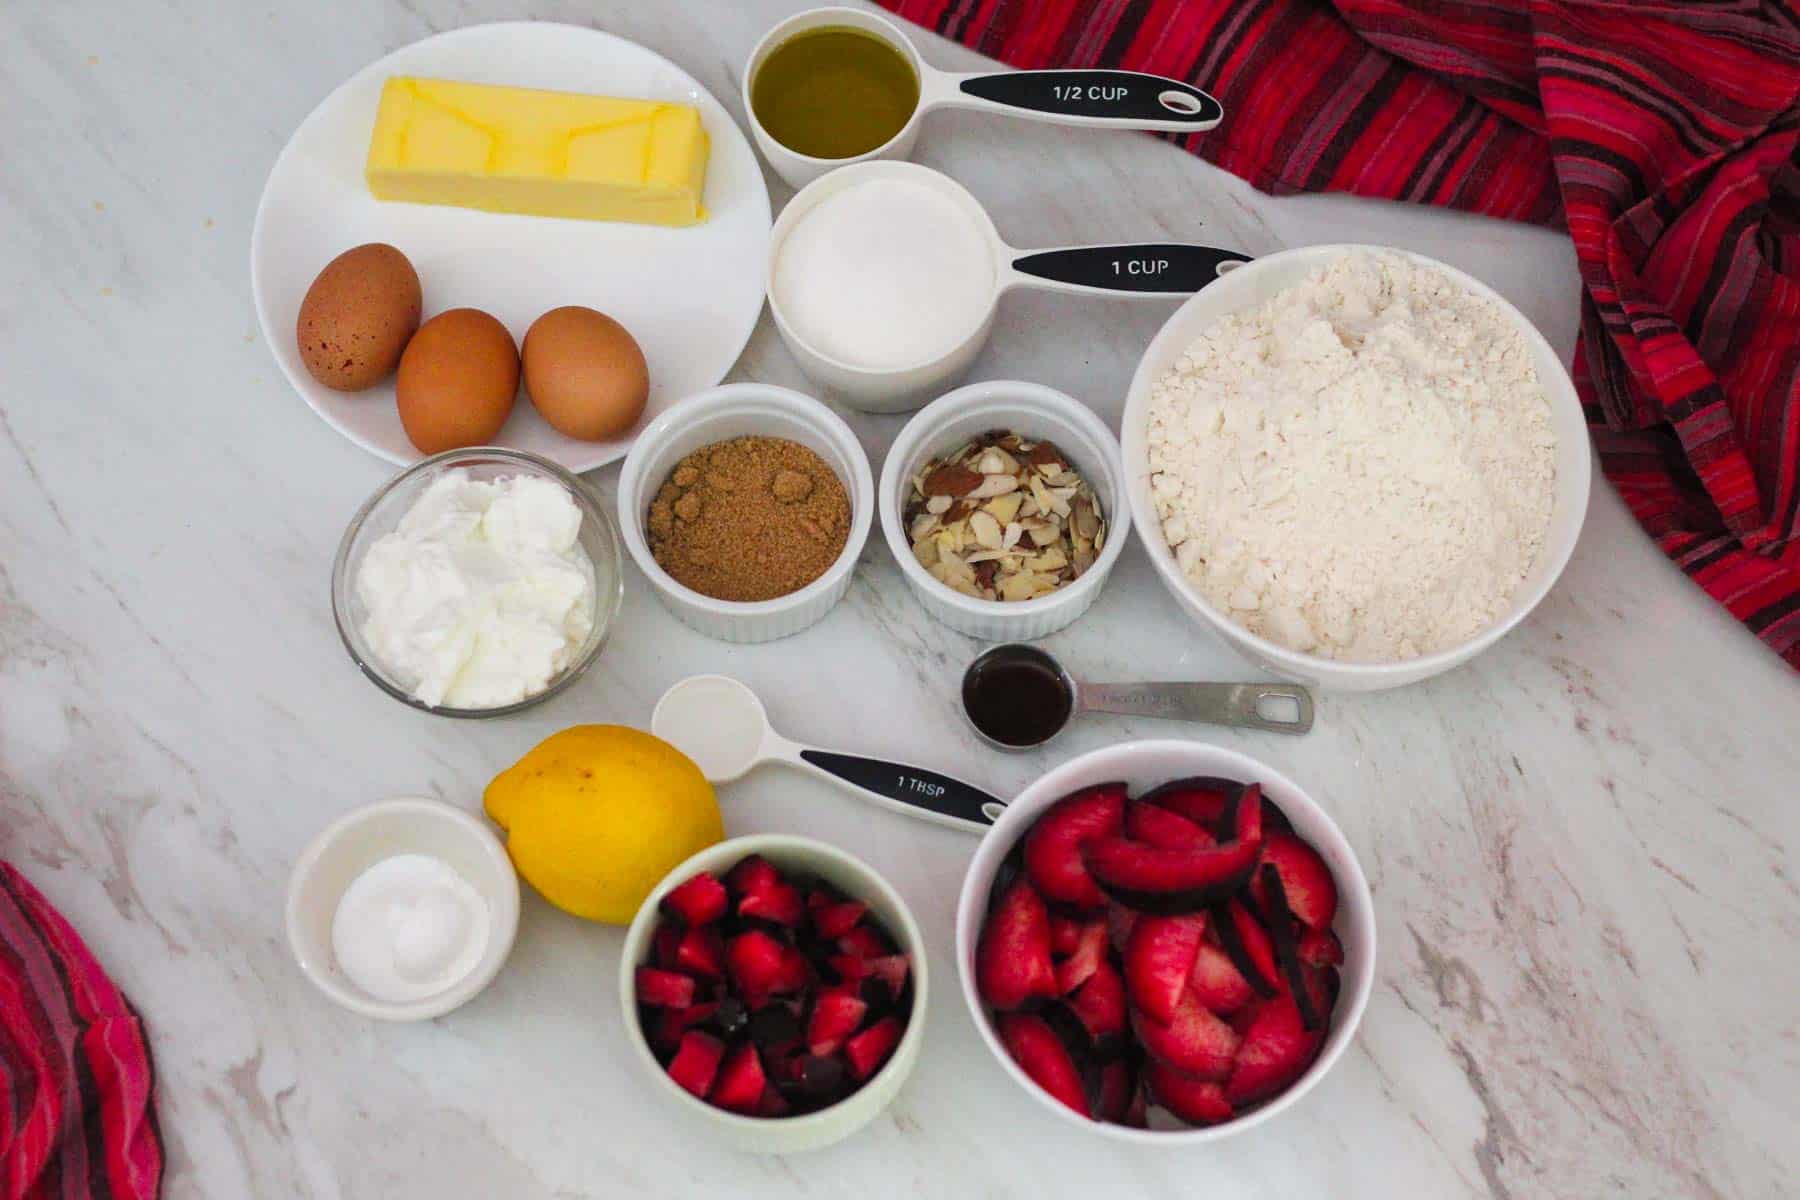 Ingredients for plum cake: butter, eggs, olive oil, yogurt, sugar, flour, almonds, brown sugar, almond extract, vanilla extract, lemon, leveners, chopped plums, sliced plums. 